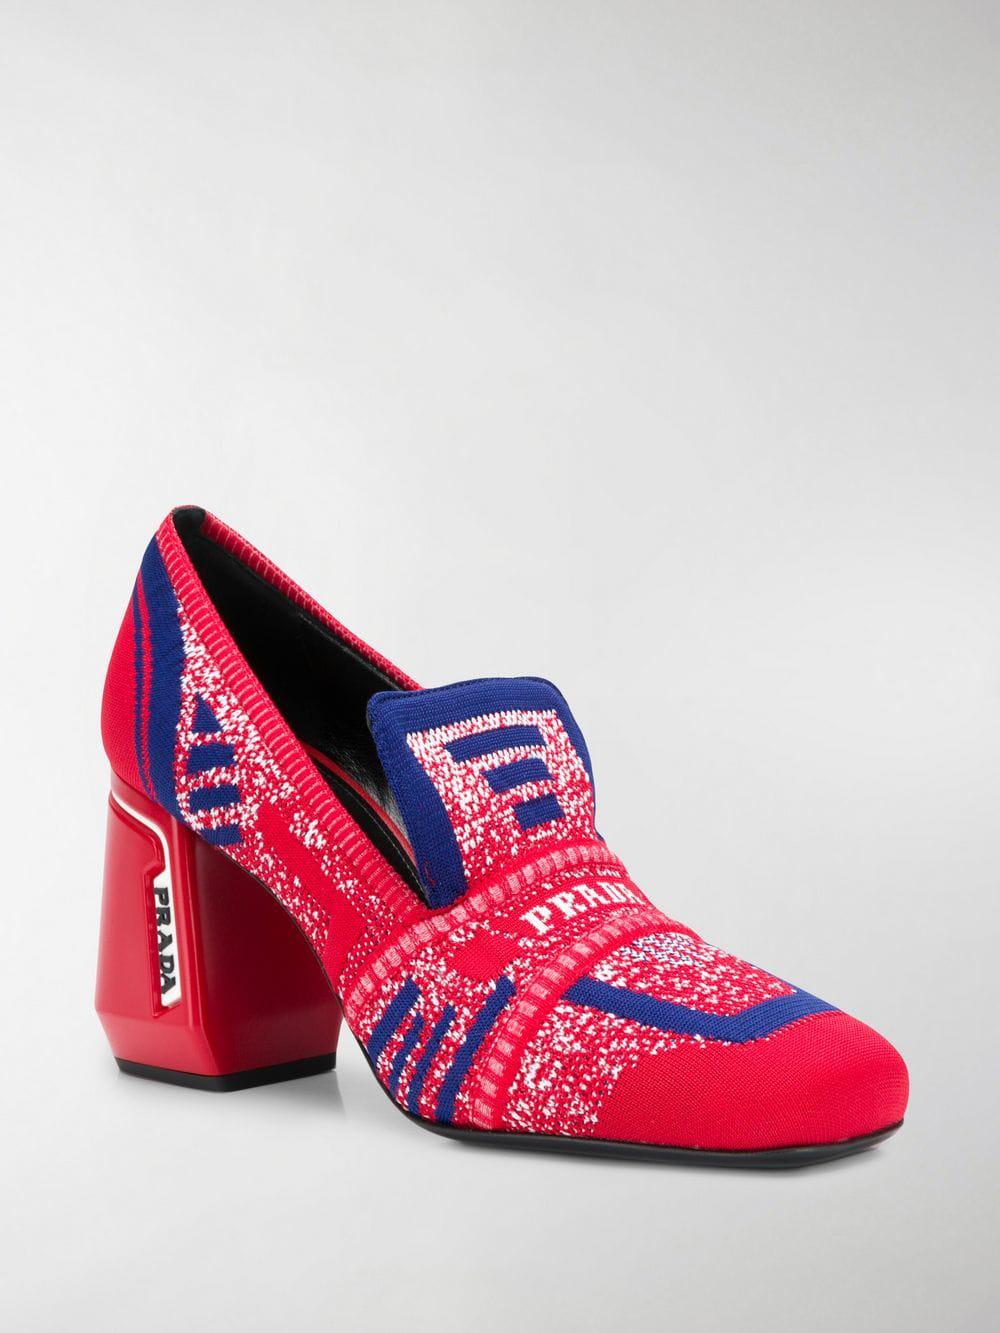 Prada Leather Knit Fabric Loafers in Red | Lyst